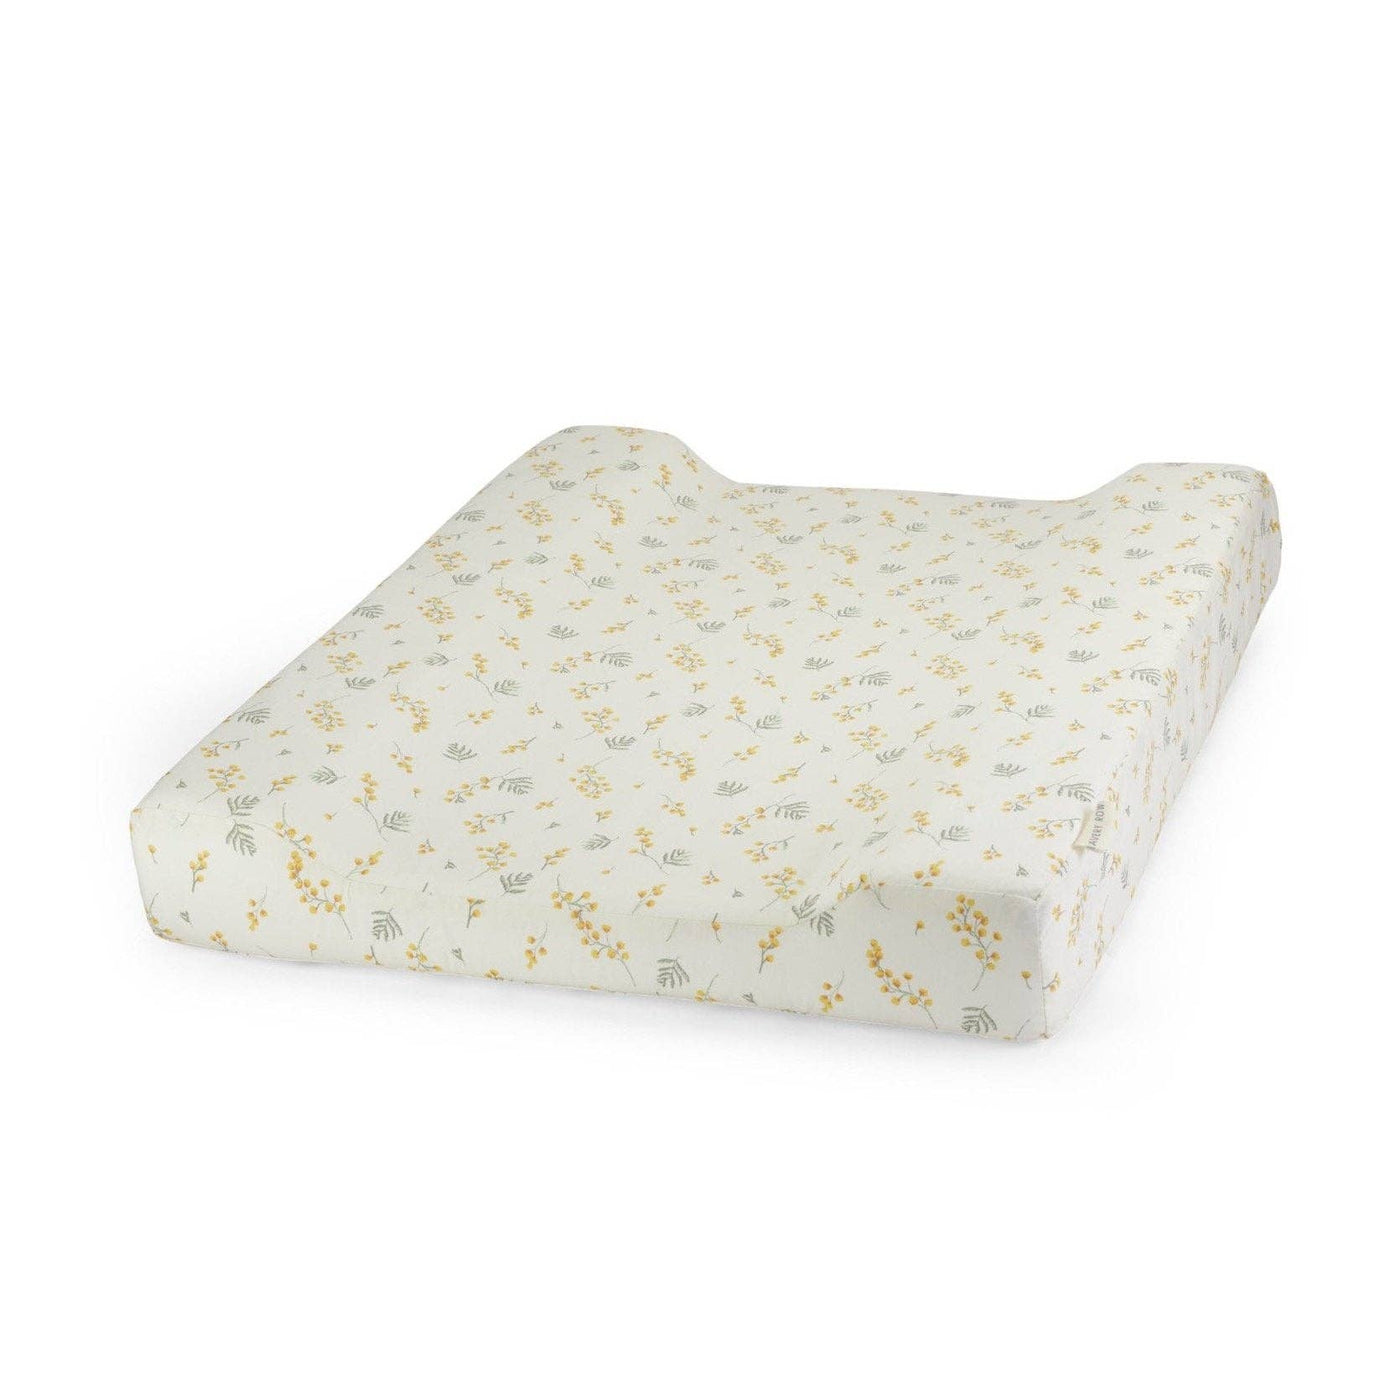 Baby Changing Cushion Cover - Mimosa - Organic Cotton